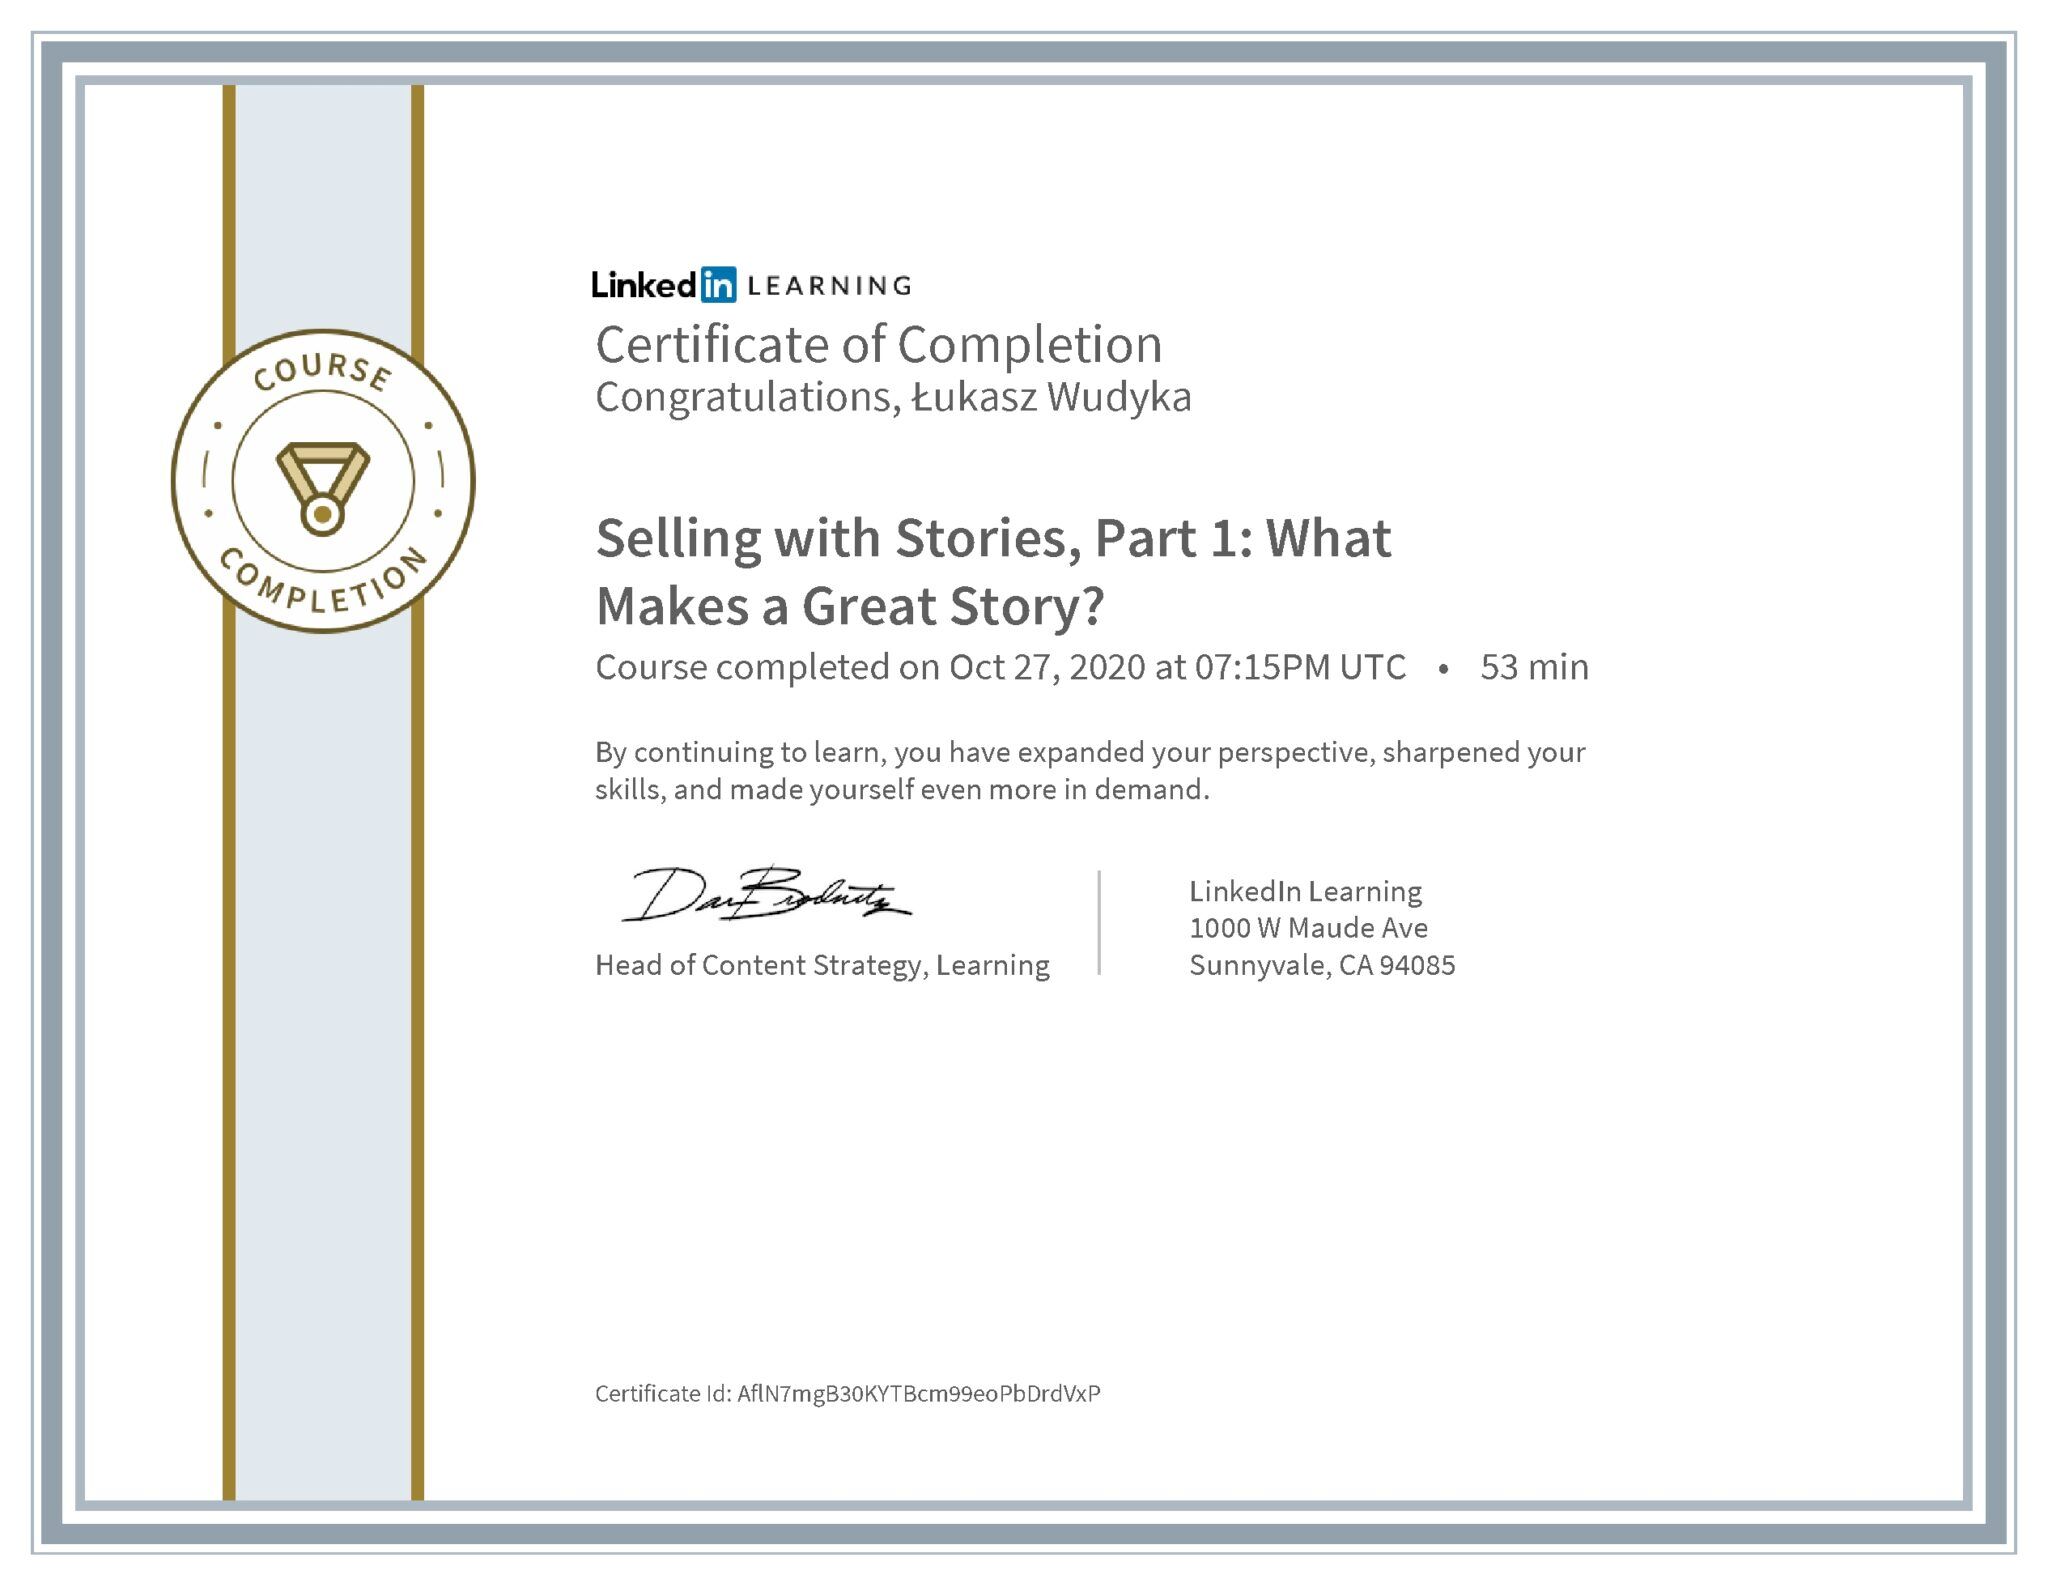 Łukasz Wudyka certyfikat LinkedIn Selling with Stories, Part 1: What Makes a Great Story?